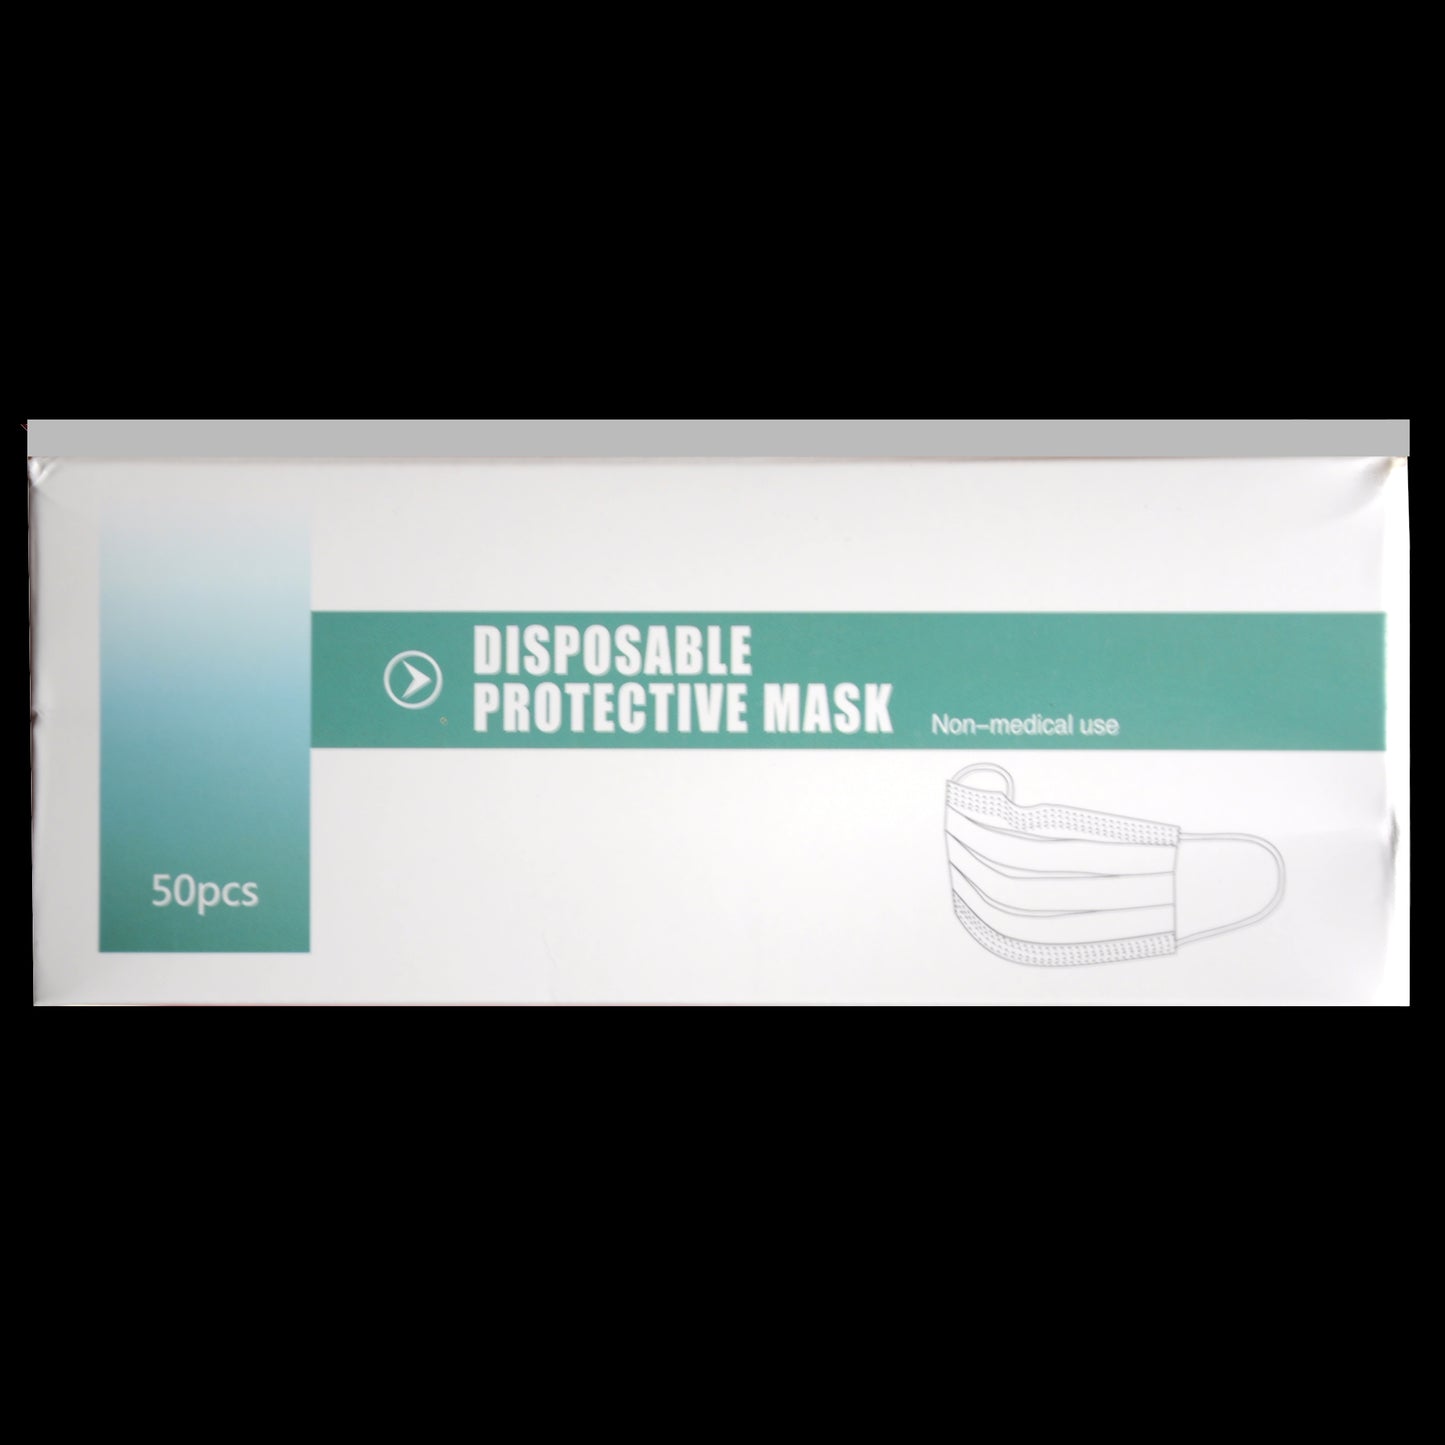 3-ply disposable face masks ($0.55/mask)